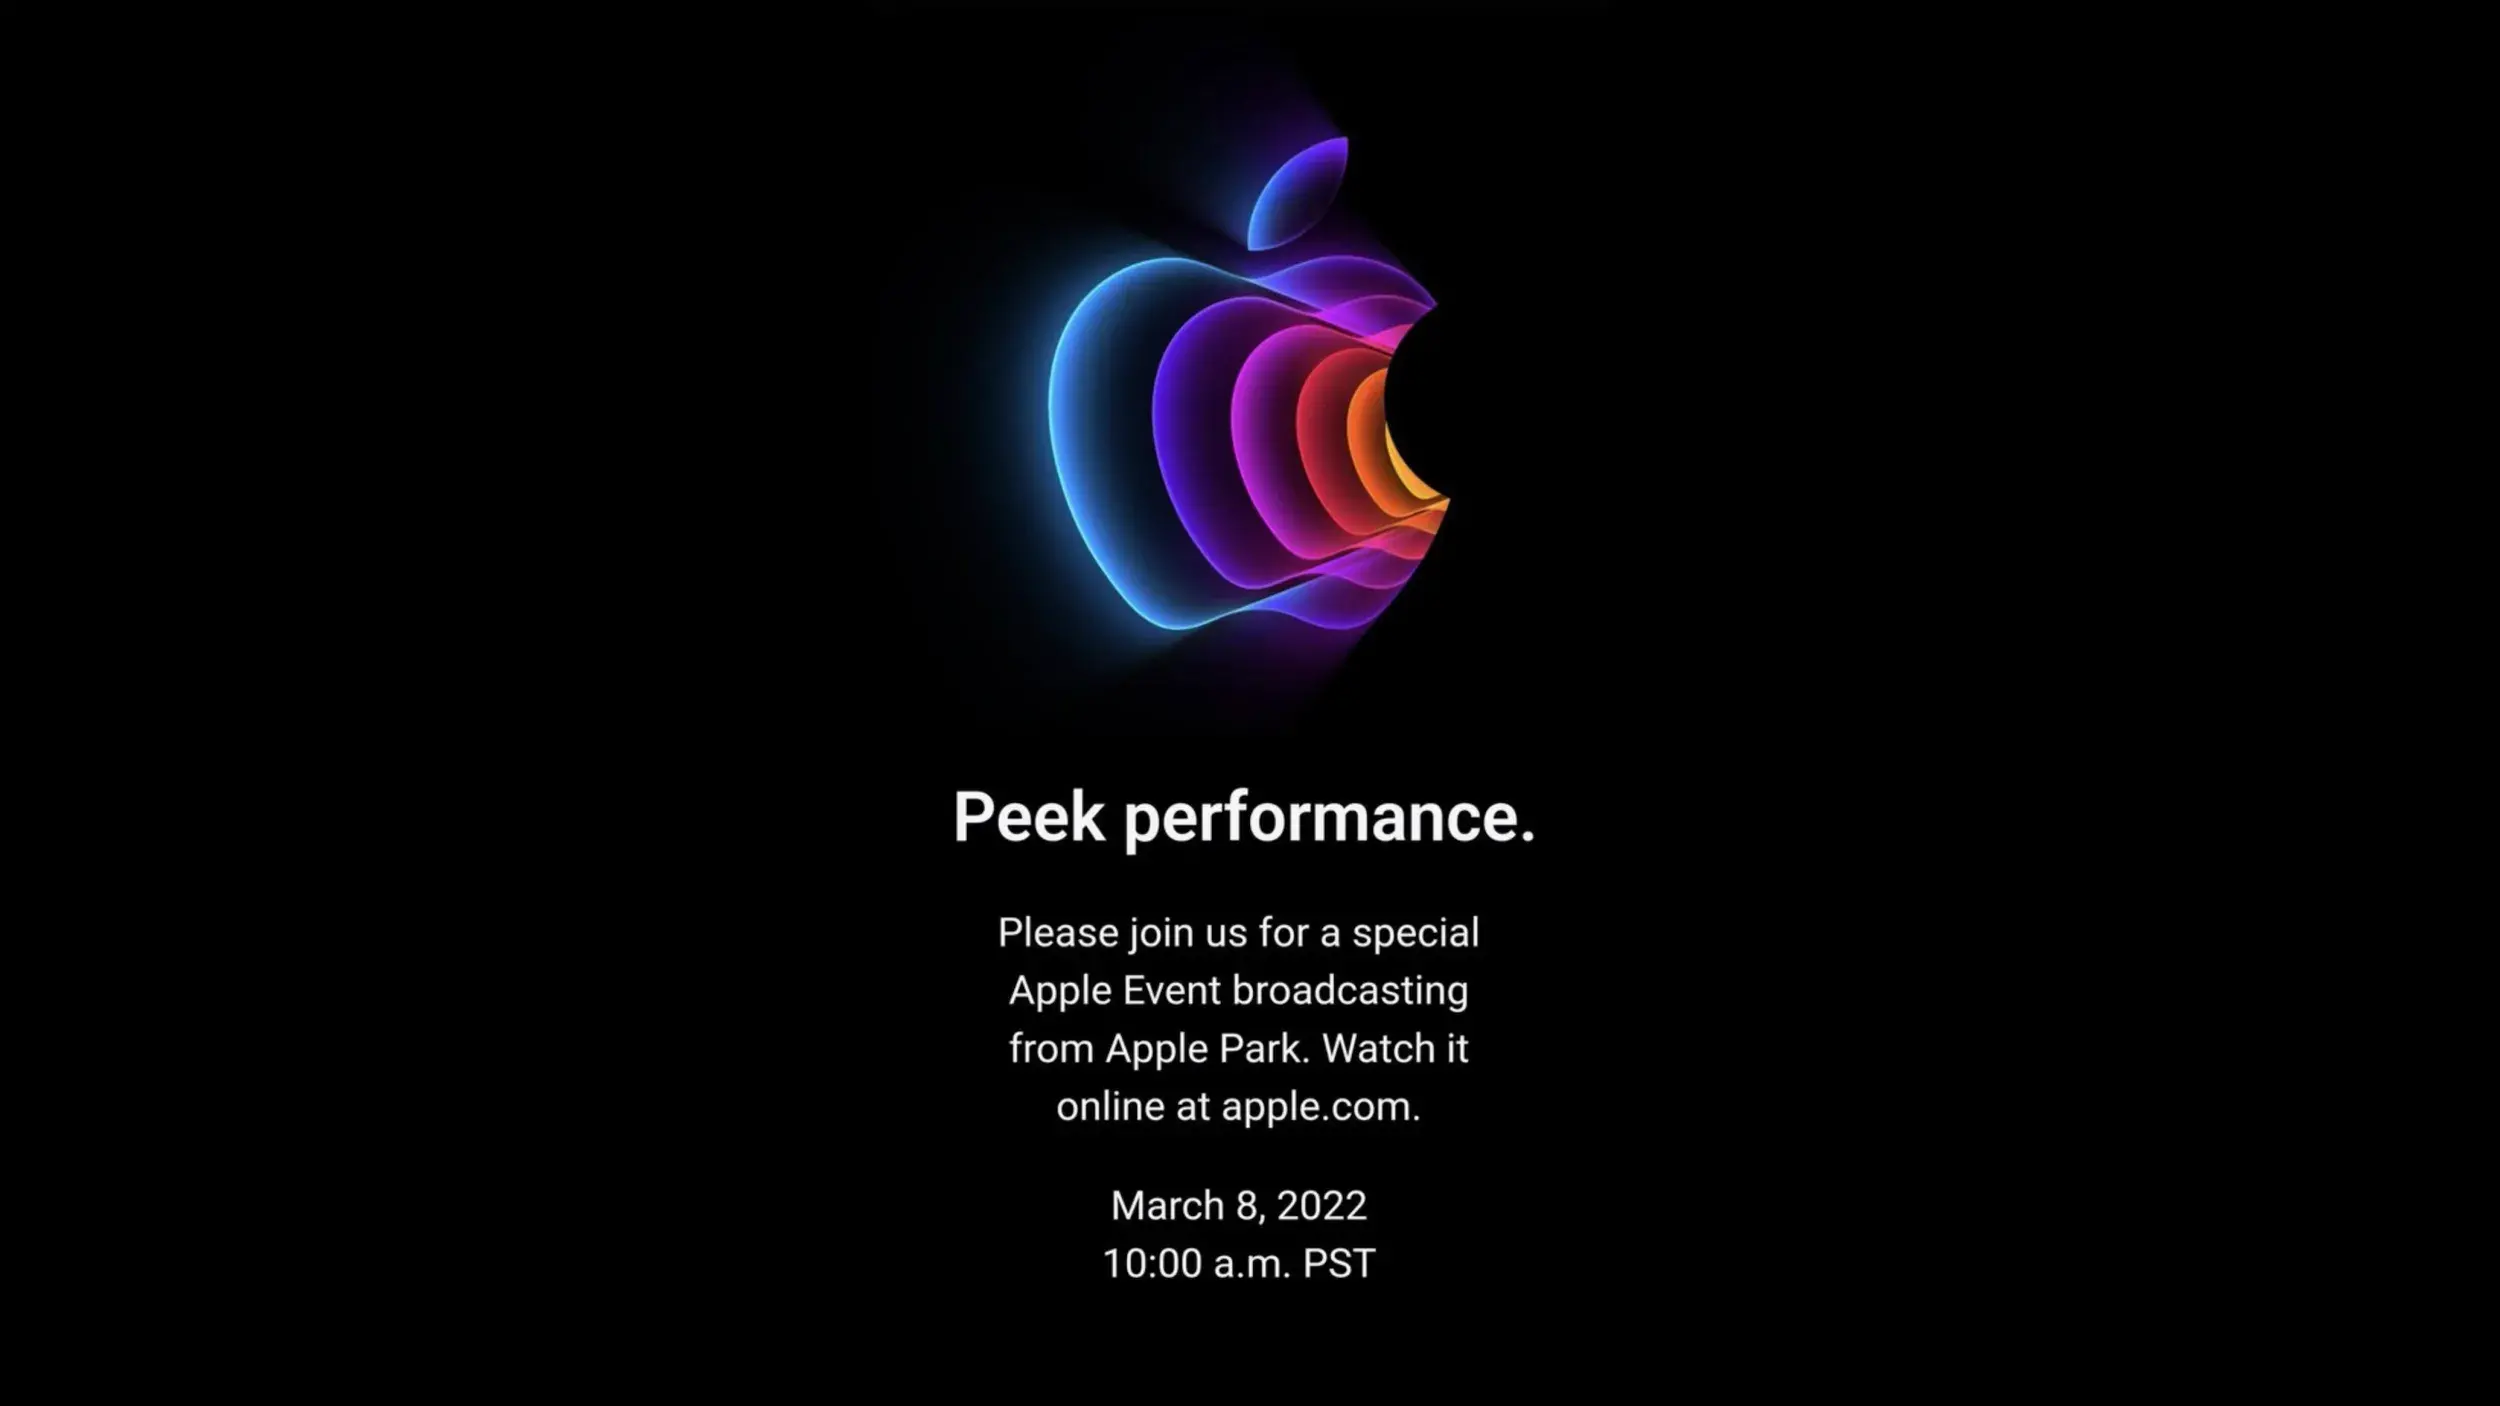 Maybe the tagline for Apple's last event should've been saved for September 2022? - iPhone 14 to be iPhone 13S: Steve Jobs’ masterpiece reaches peak, but Apple makes the Max out of it